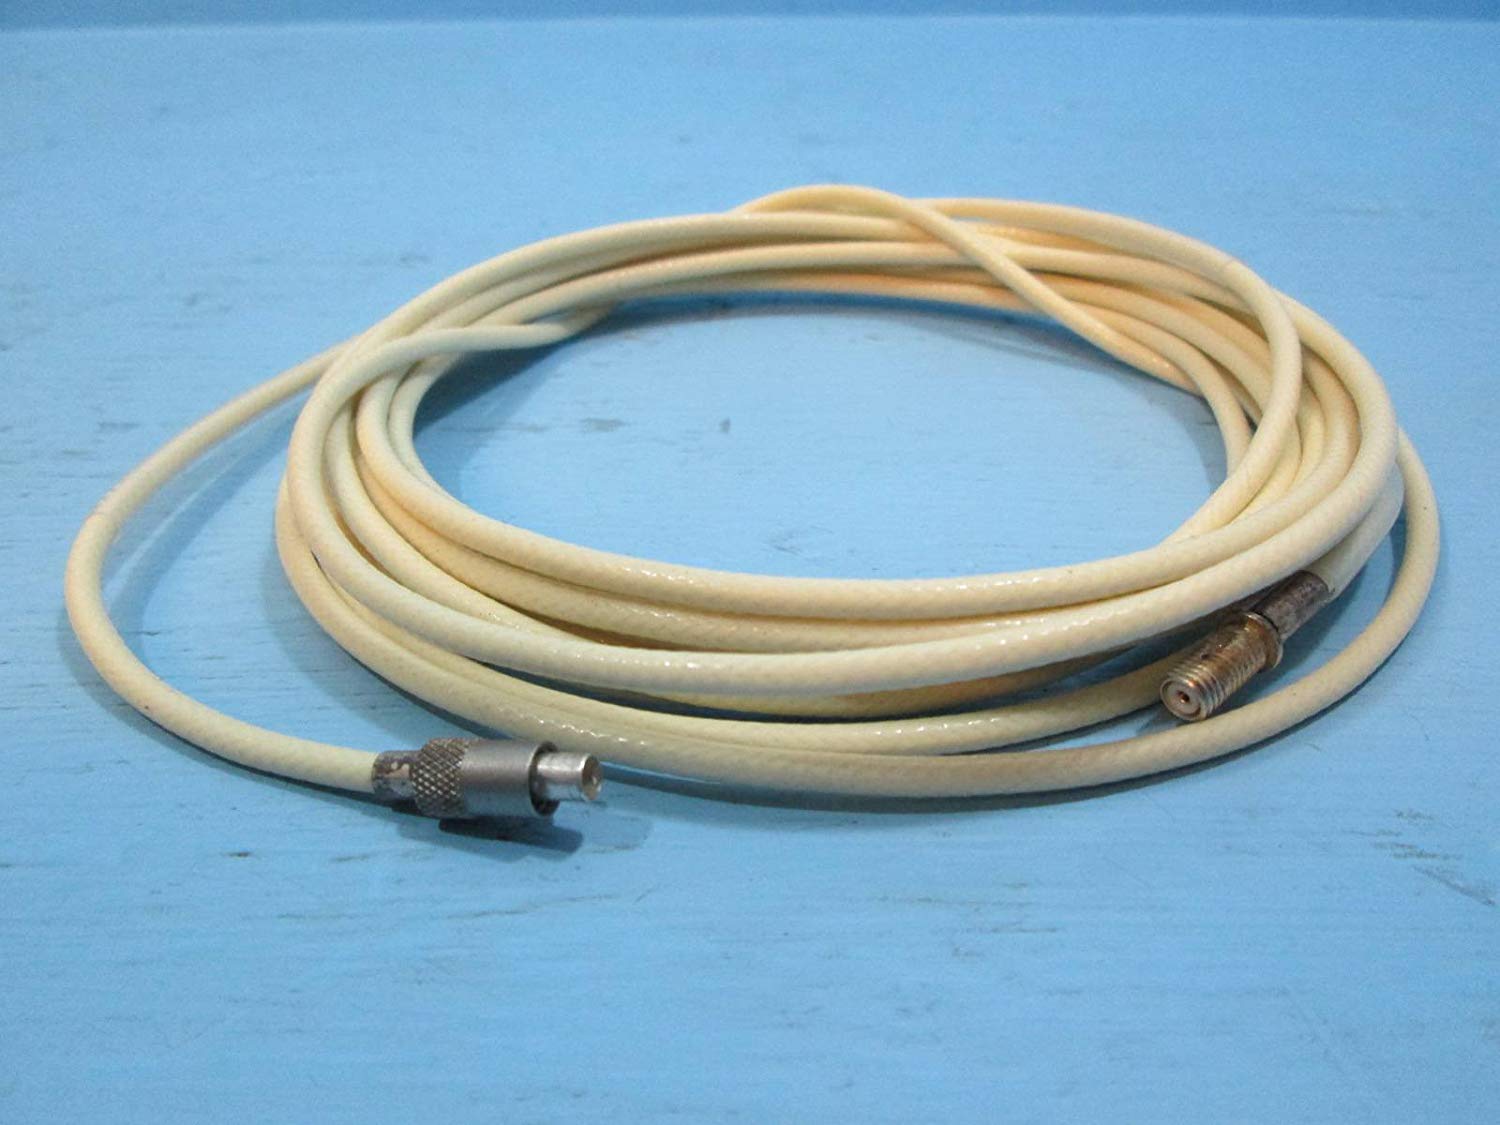 CAT CABLE EXTENSION Nº. 21747-045-00, FOR VIBRATION SYSTEM 1015 1035 105J, BY BENTLY NEVADA